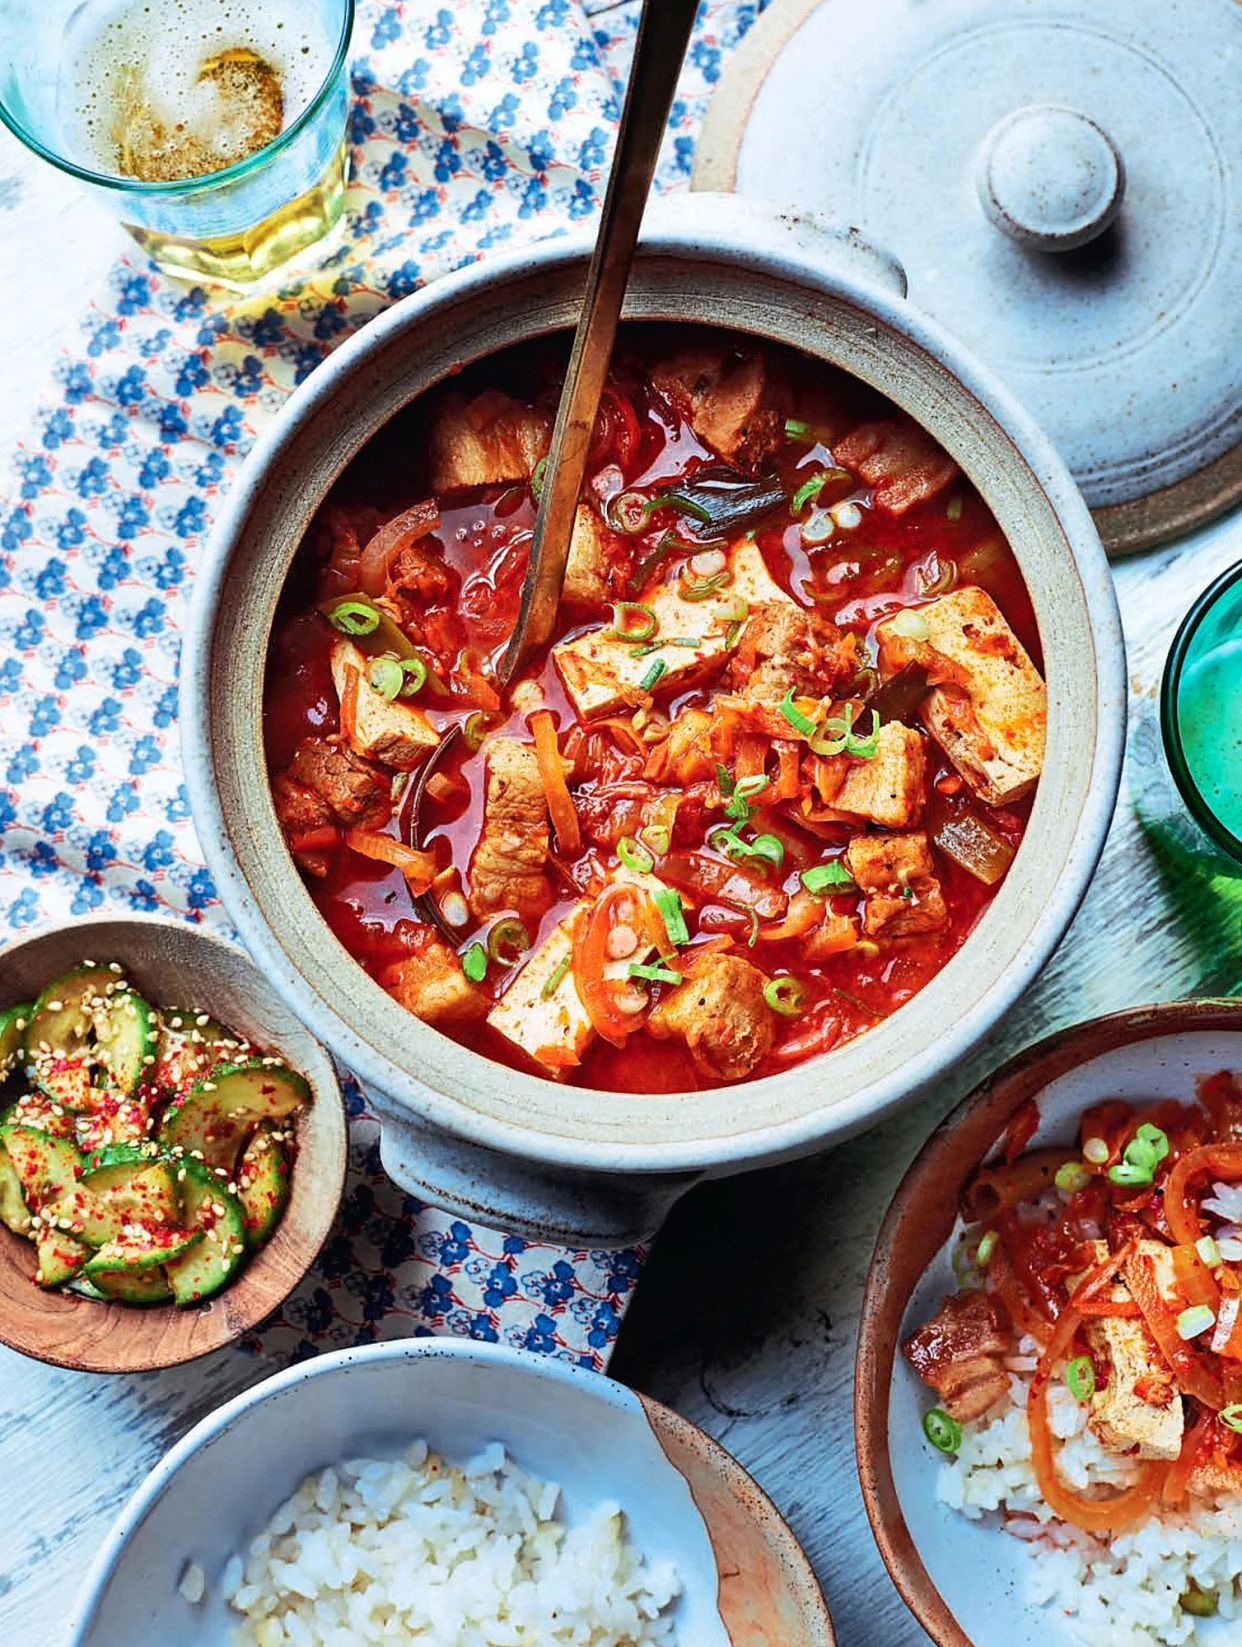 Flavor-Packed 1 Bowl Meals From Around the World: Recipes for Kimchi, Bo Kho and Chicken Korma